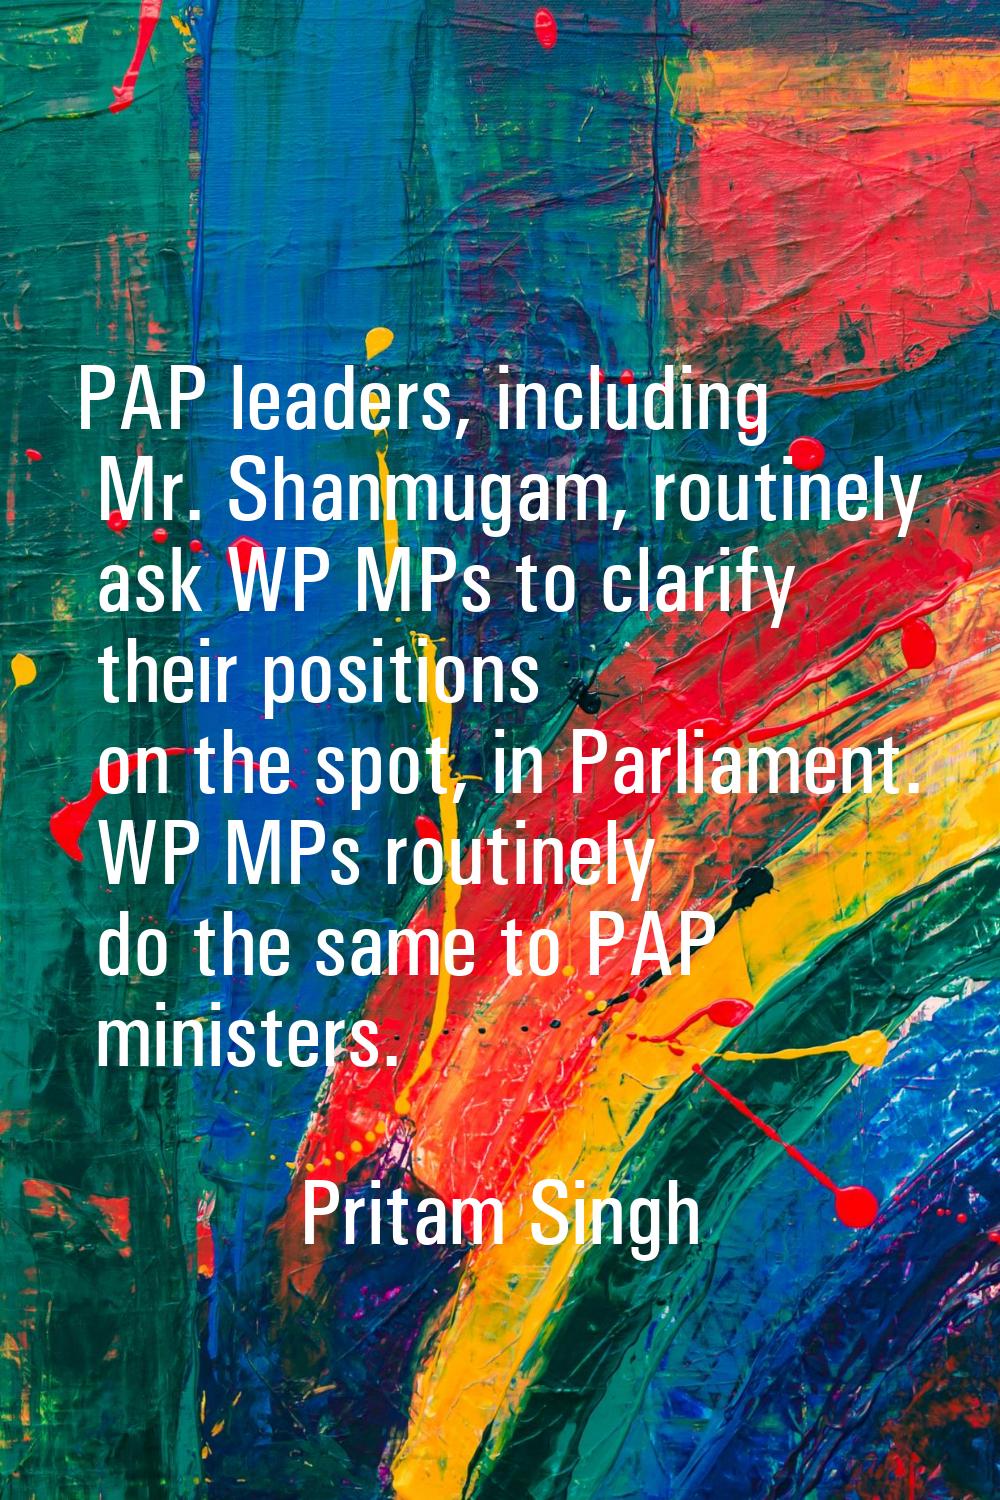 PAP leaders, including Mr. Shanmugam, routinely ask WP MPs to clarify their positions on the spot, 